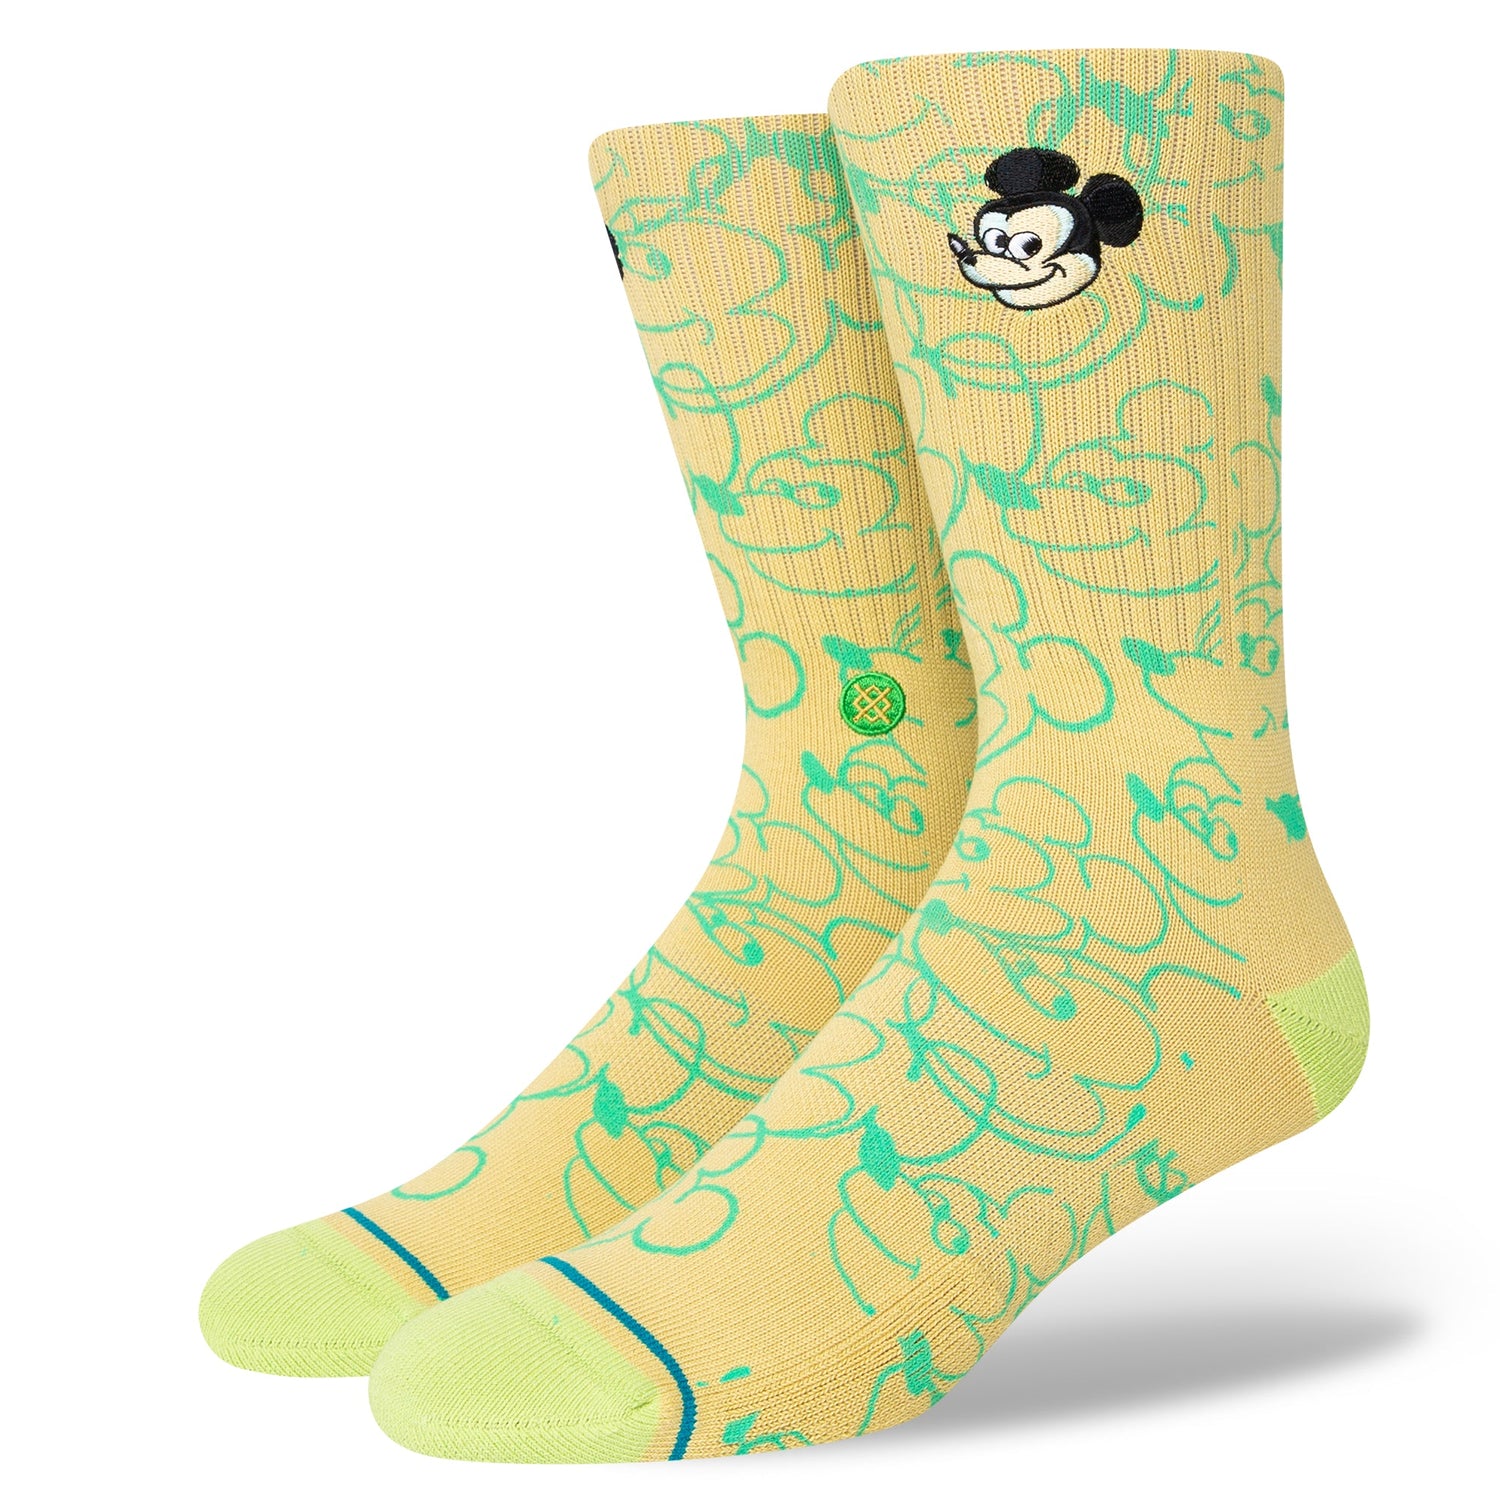 Chaussettes mi-mollet moutarde Dillon Froelich Mickey de Stance